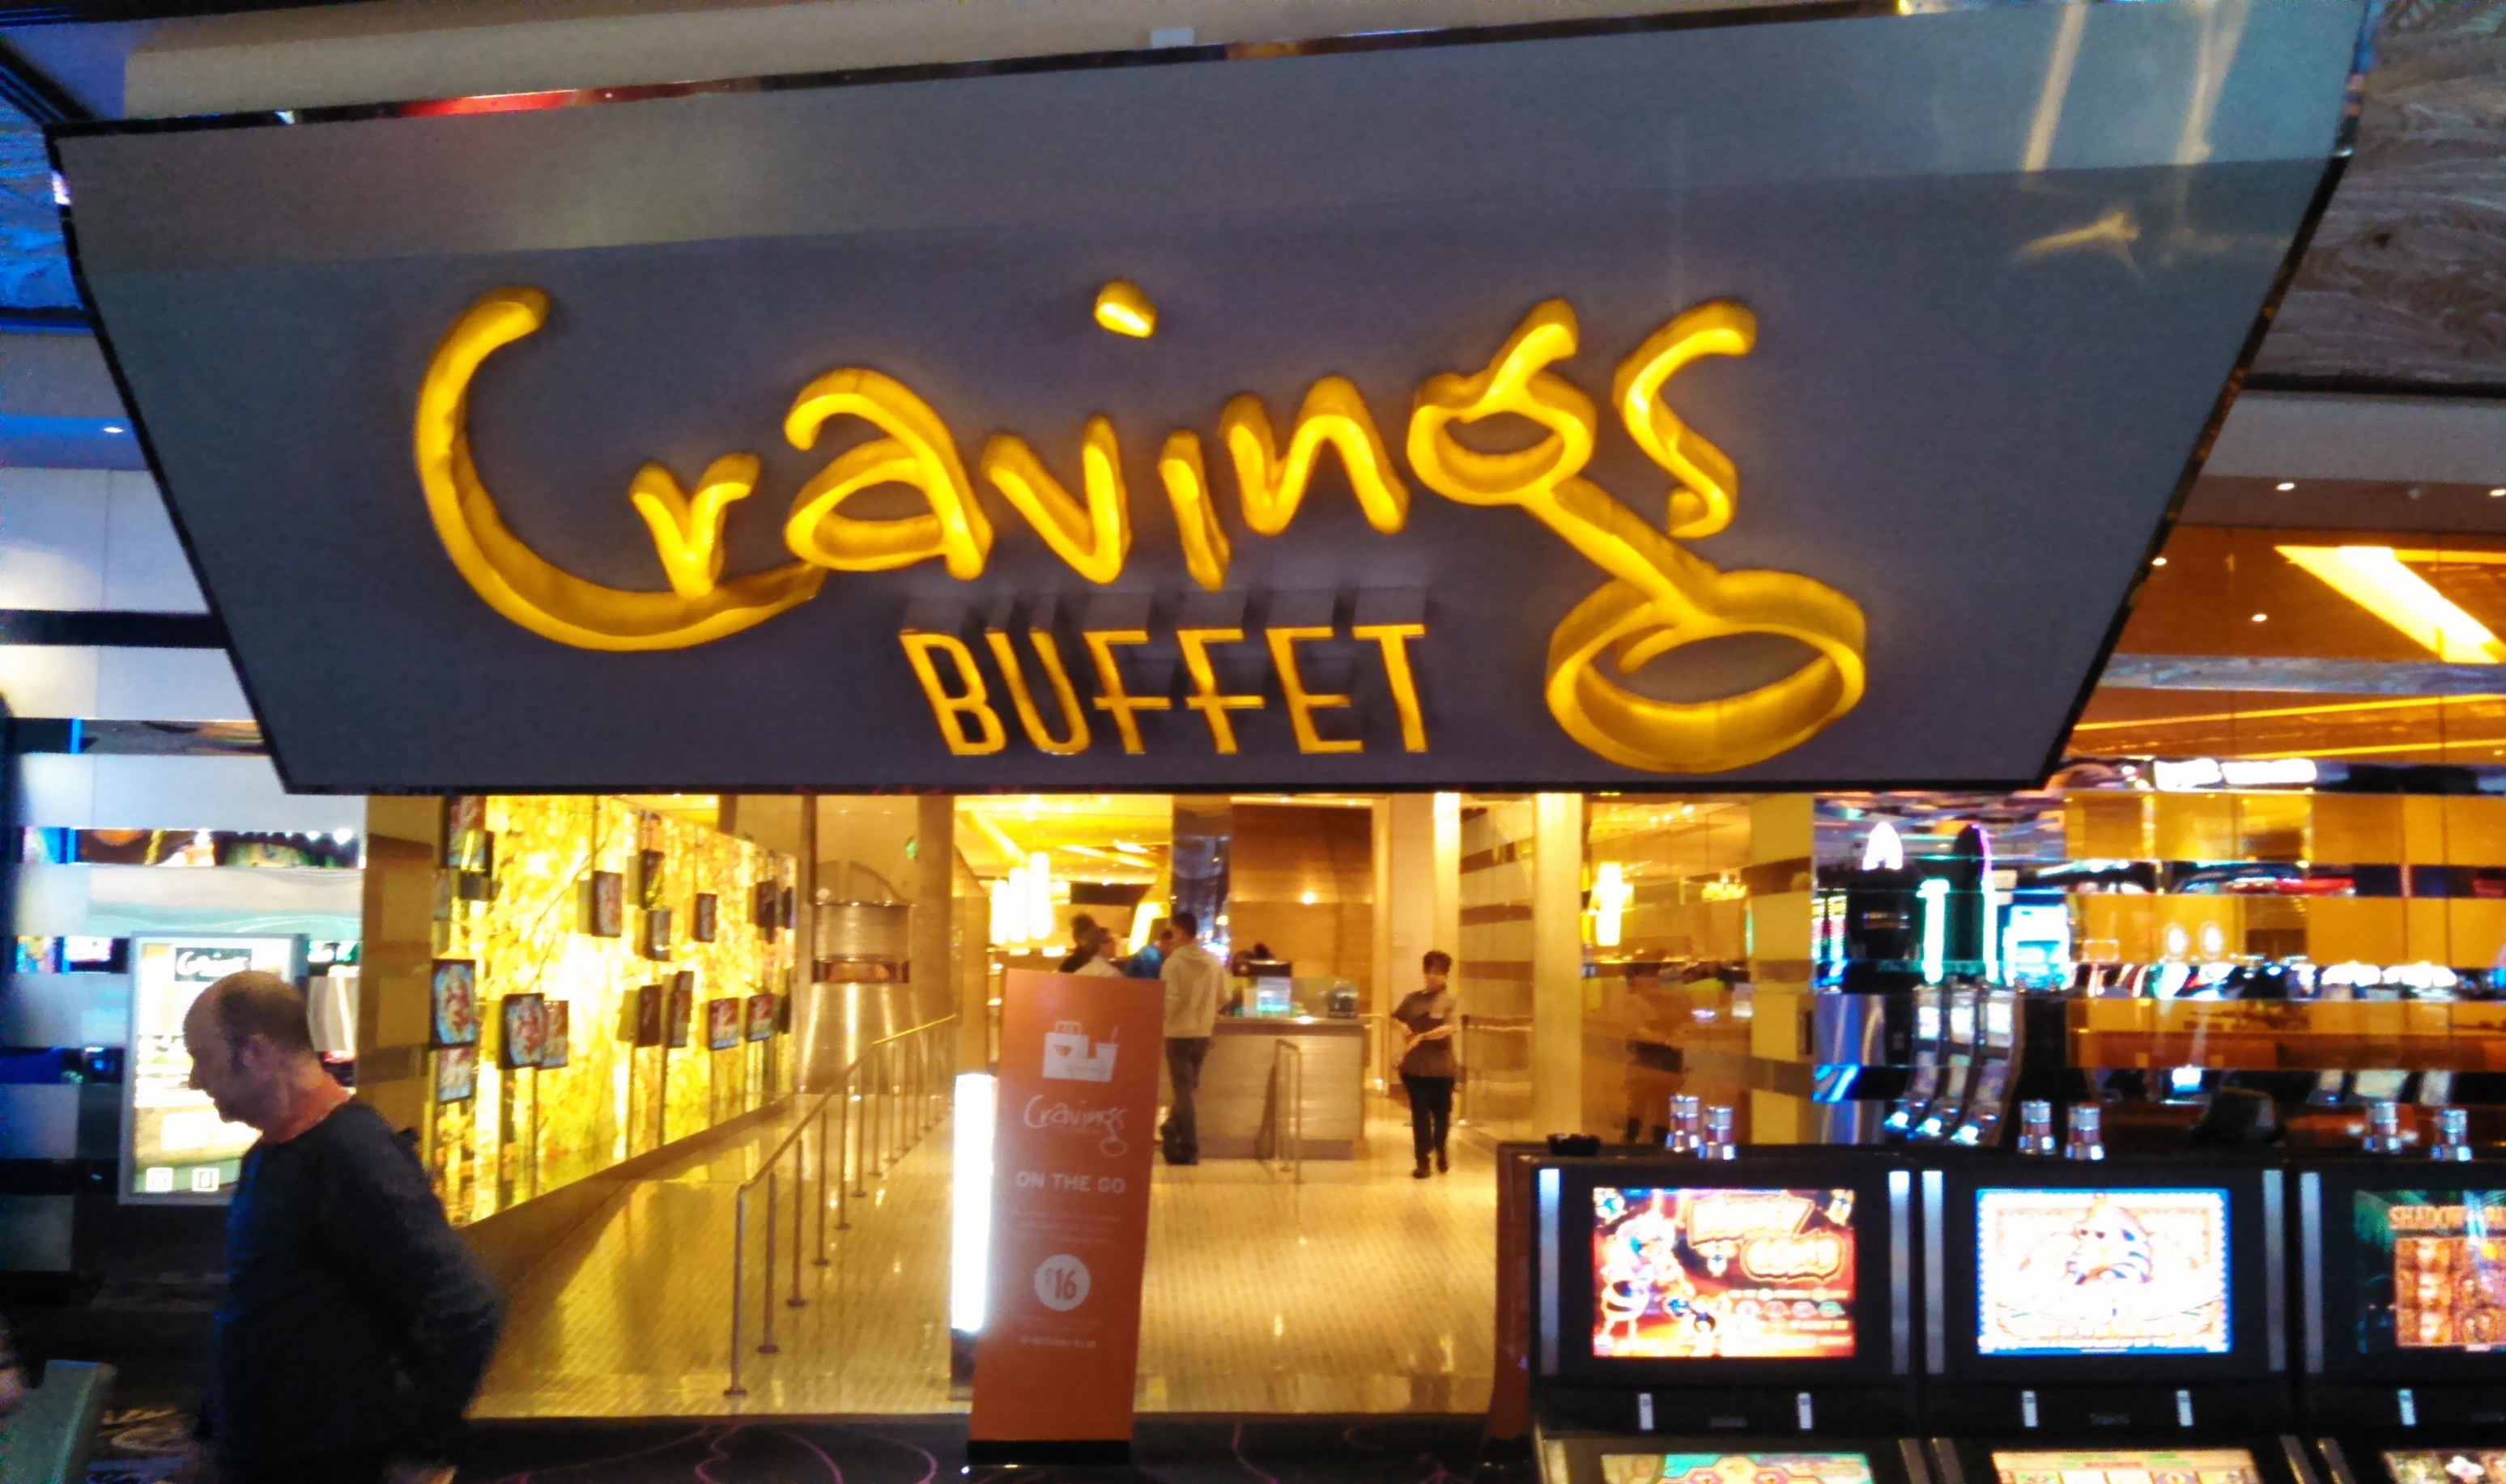 Cravings Buffet – The Mirage